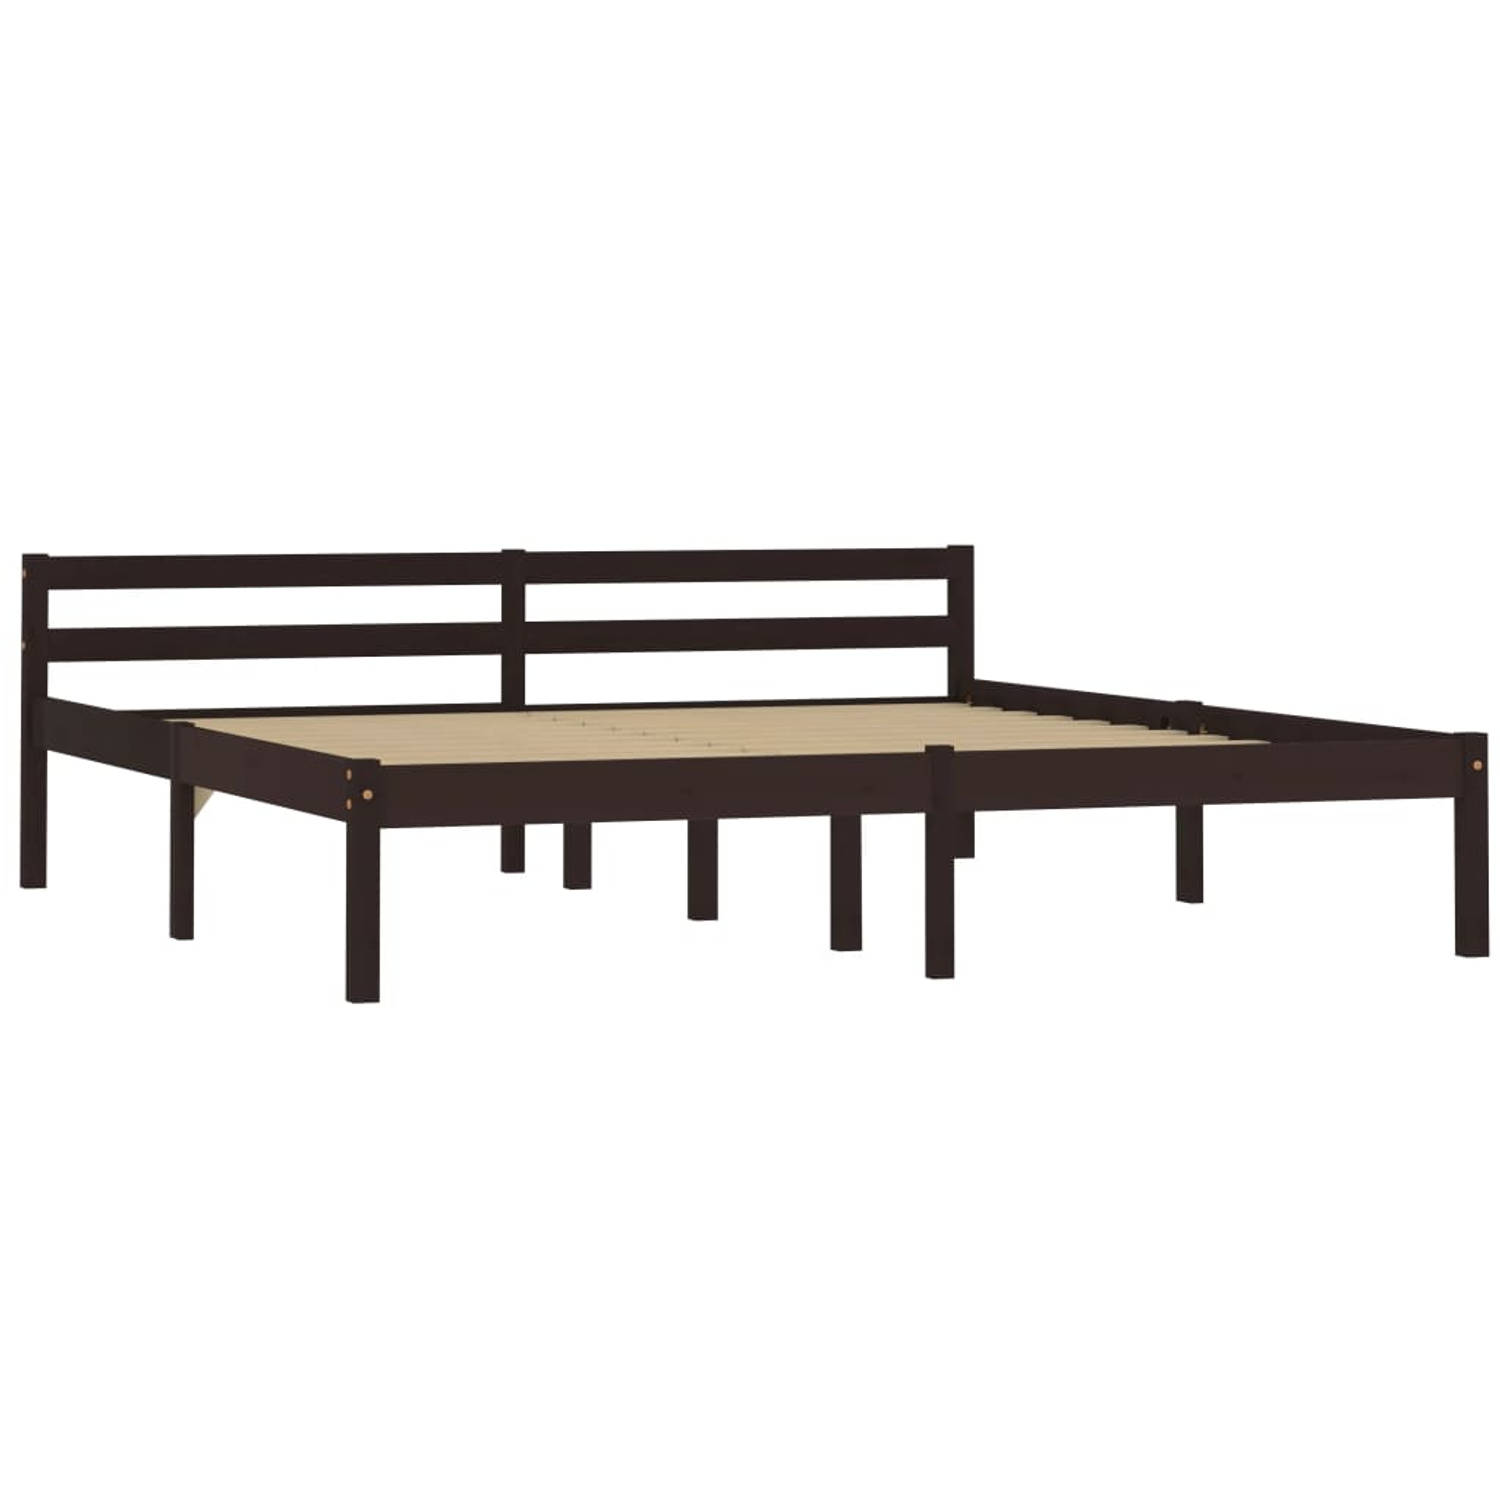 The Living Store Bedframe massief grenenhout donkerbruin 180x200 cm - Bed